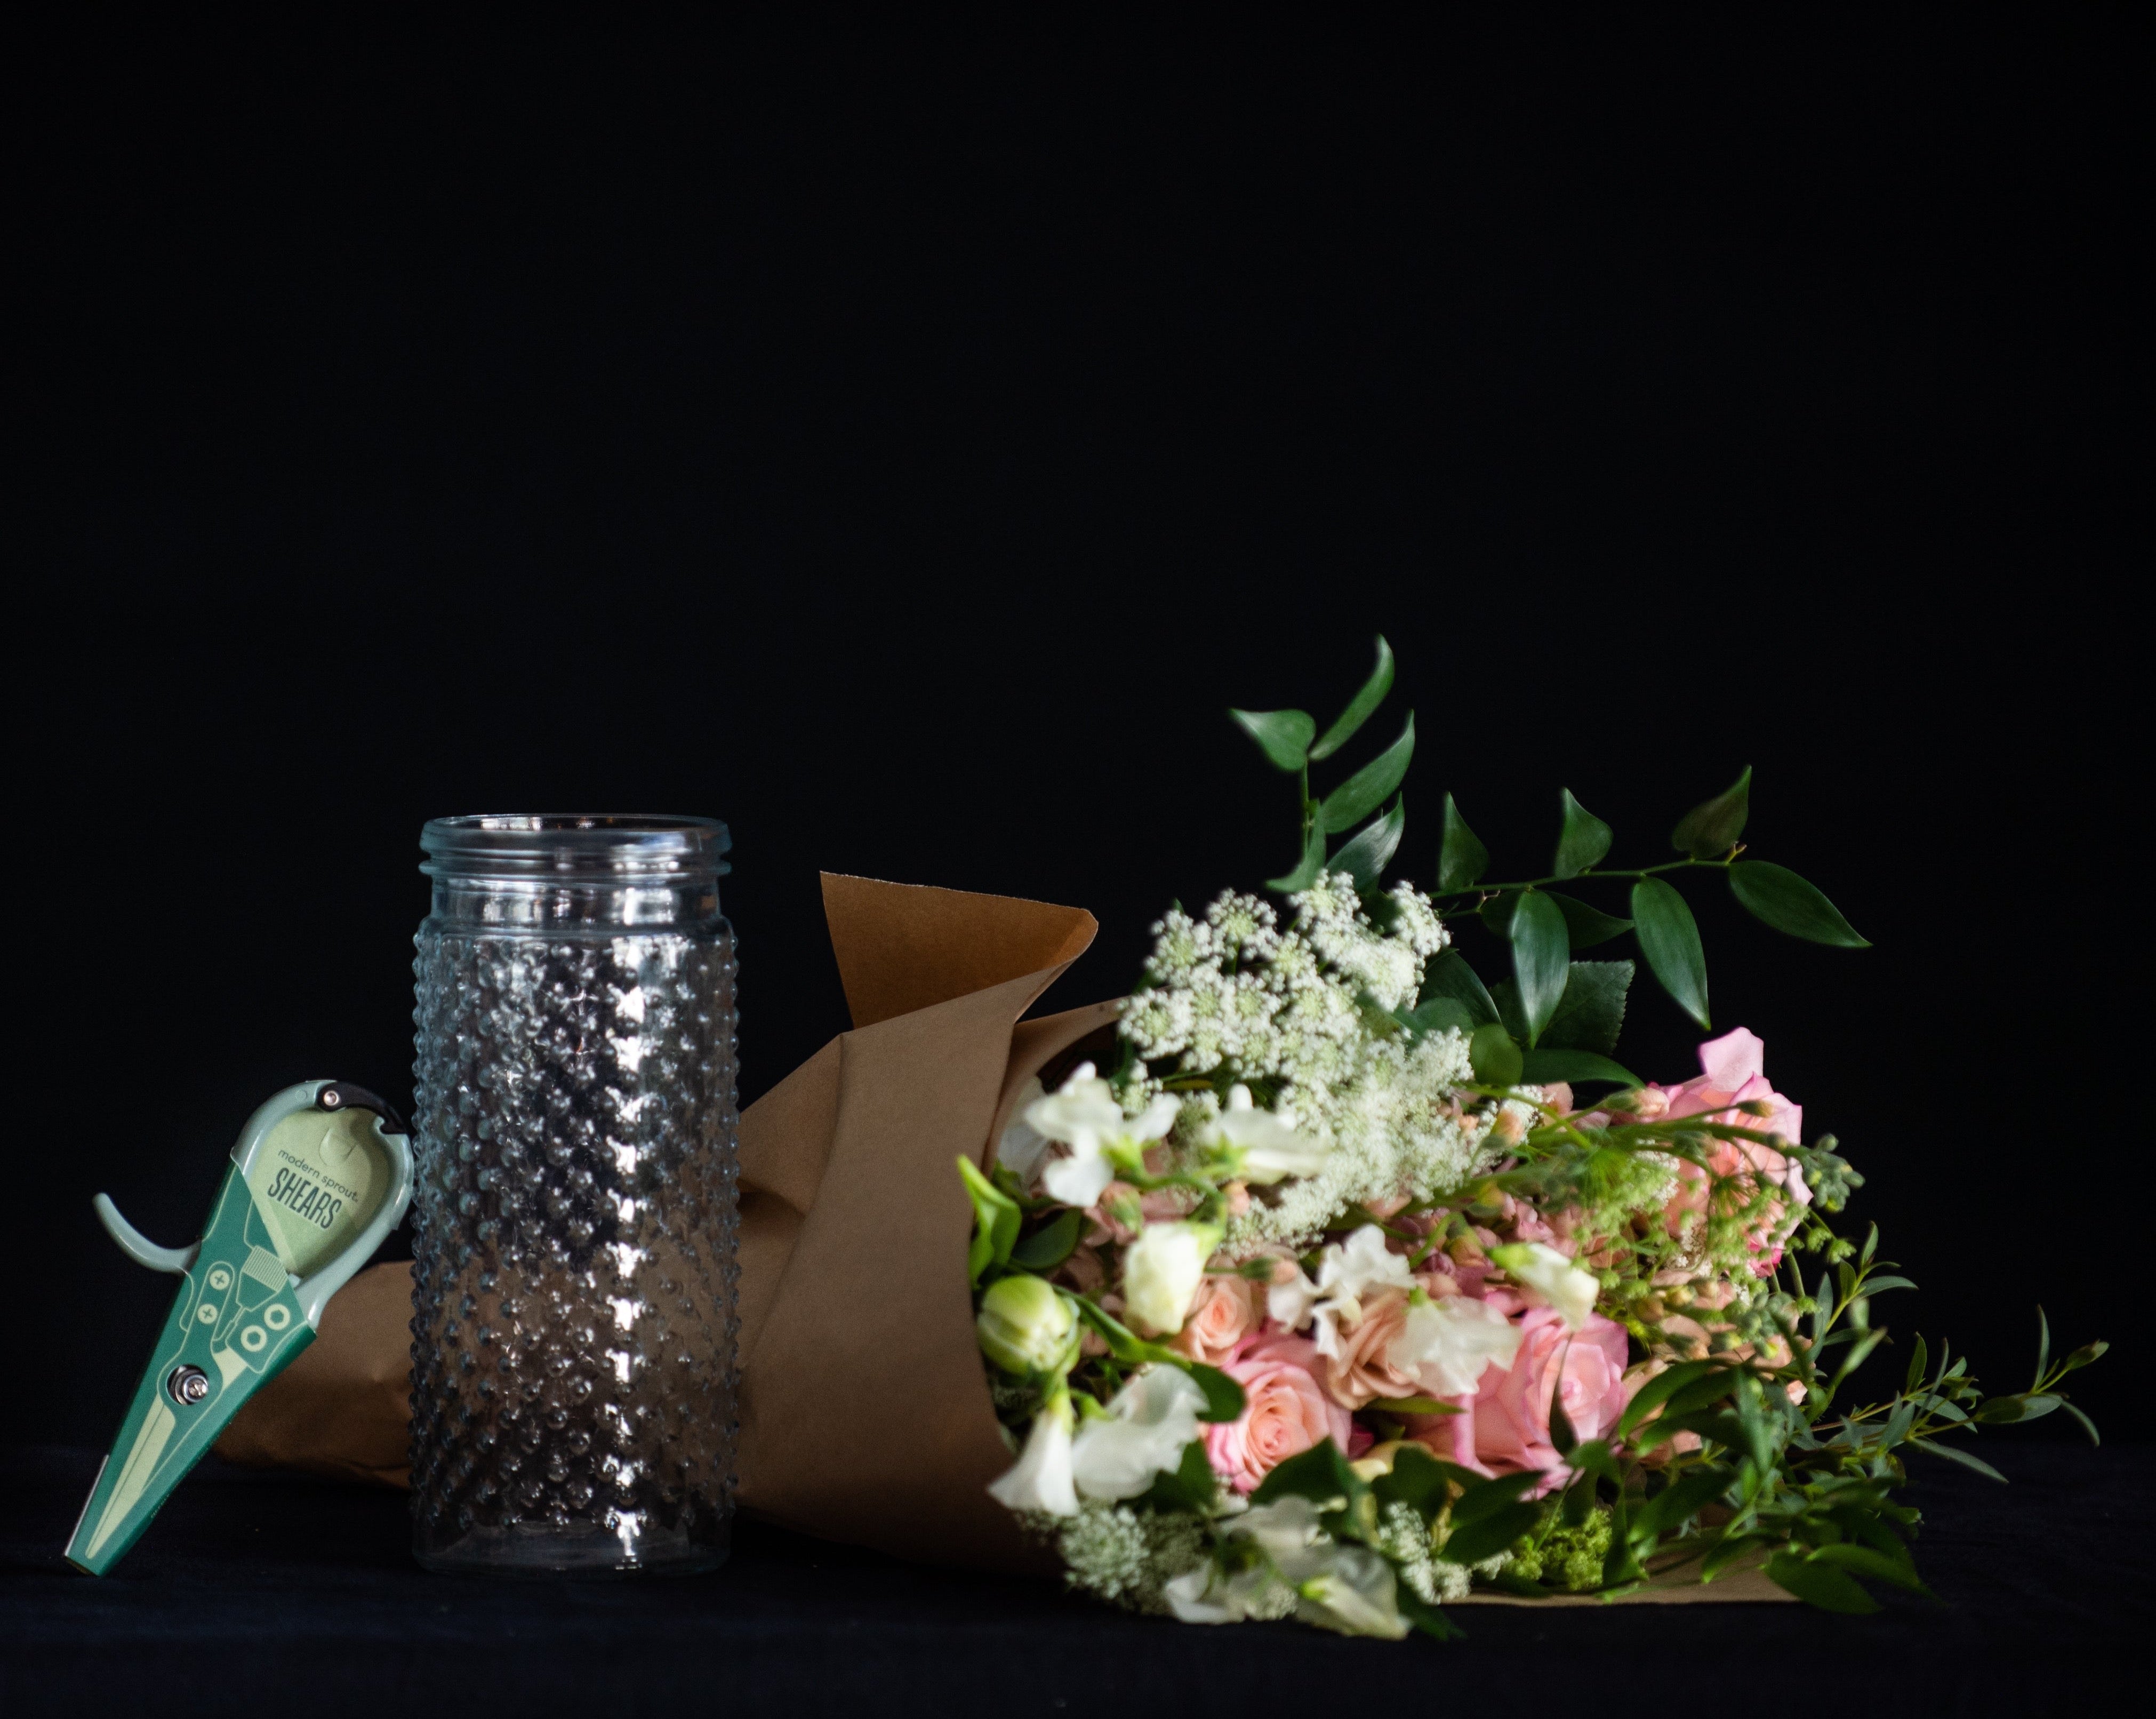 A DIY flower arranging kit with fresh flowers, floral shears, and a vase